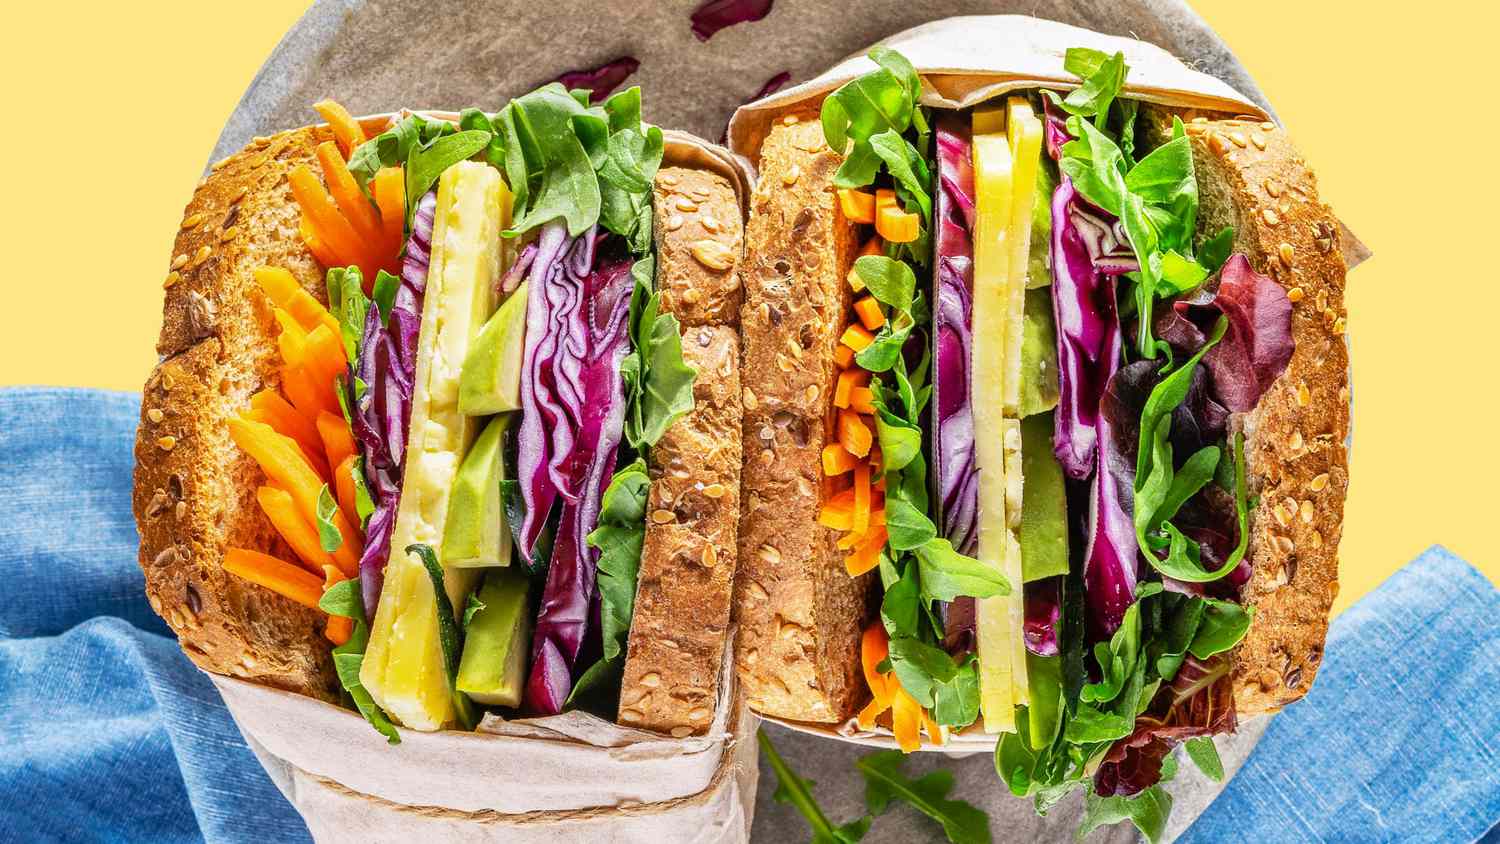 12-Vegetarian-Sandwiches-That-Will-Actually-Fill-You-Up-GettyImages-1220580937